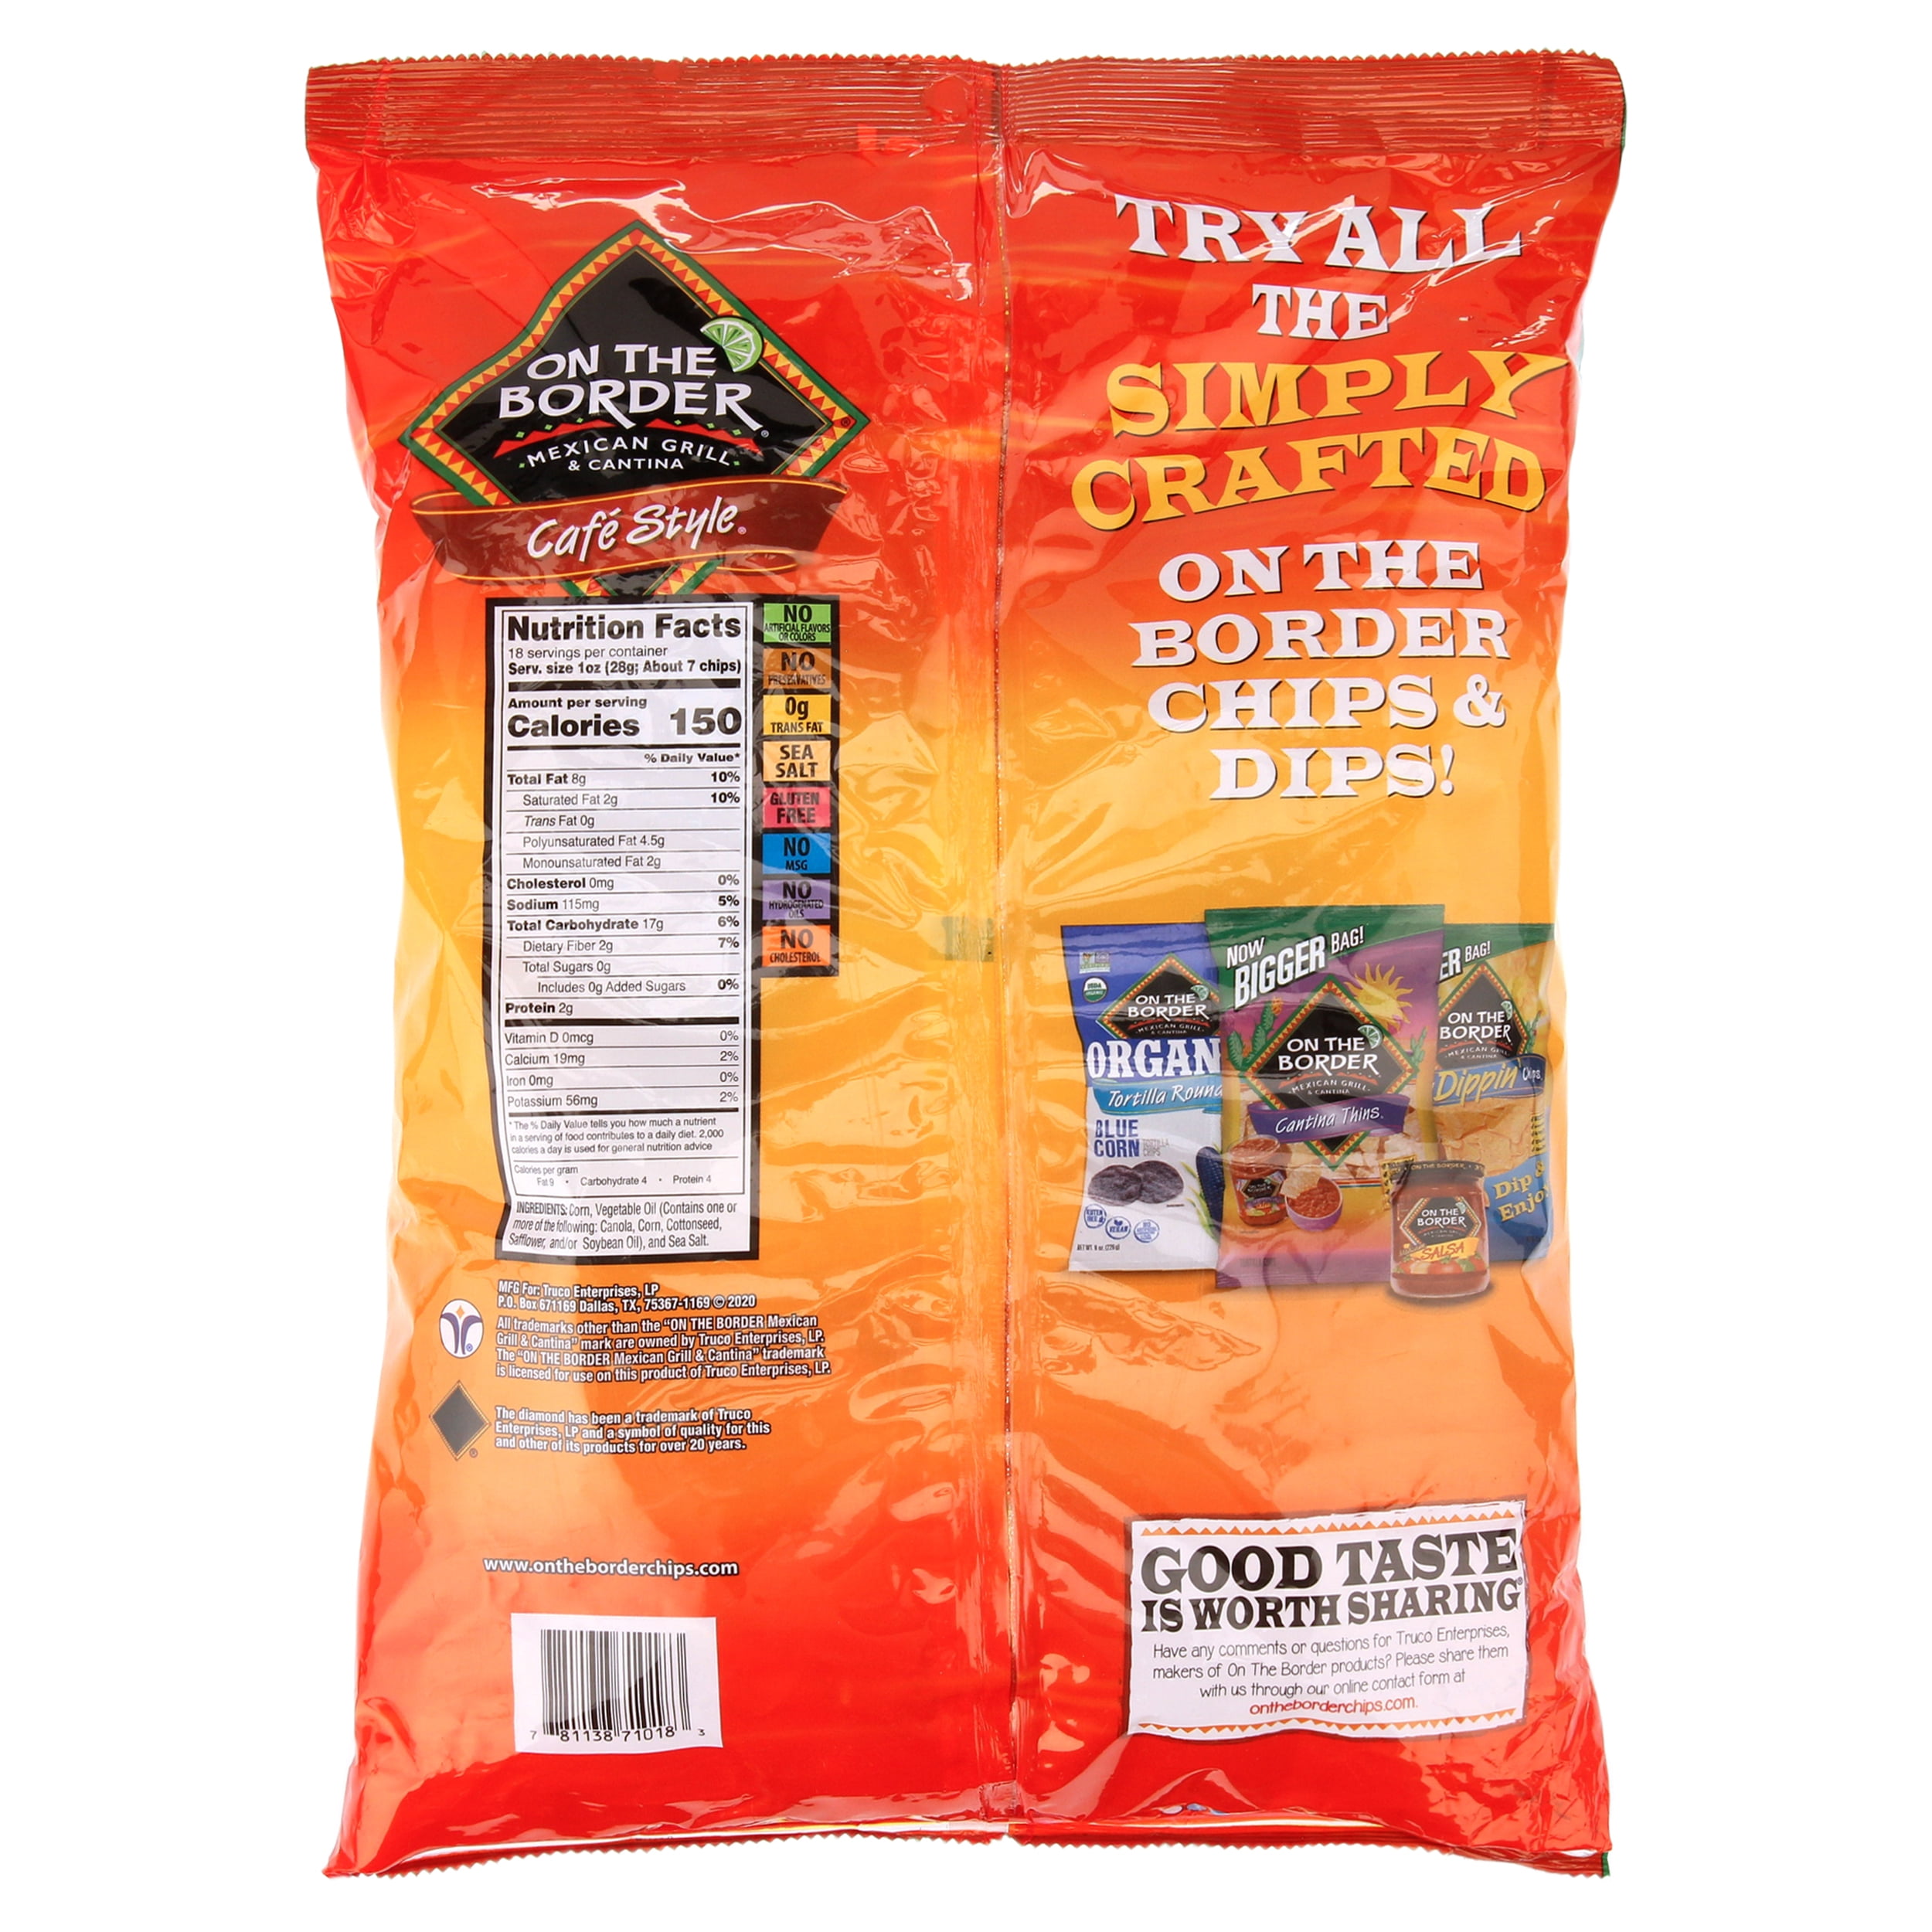  On The Border Cafe Style Tortilla Chips, 11 Ounce